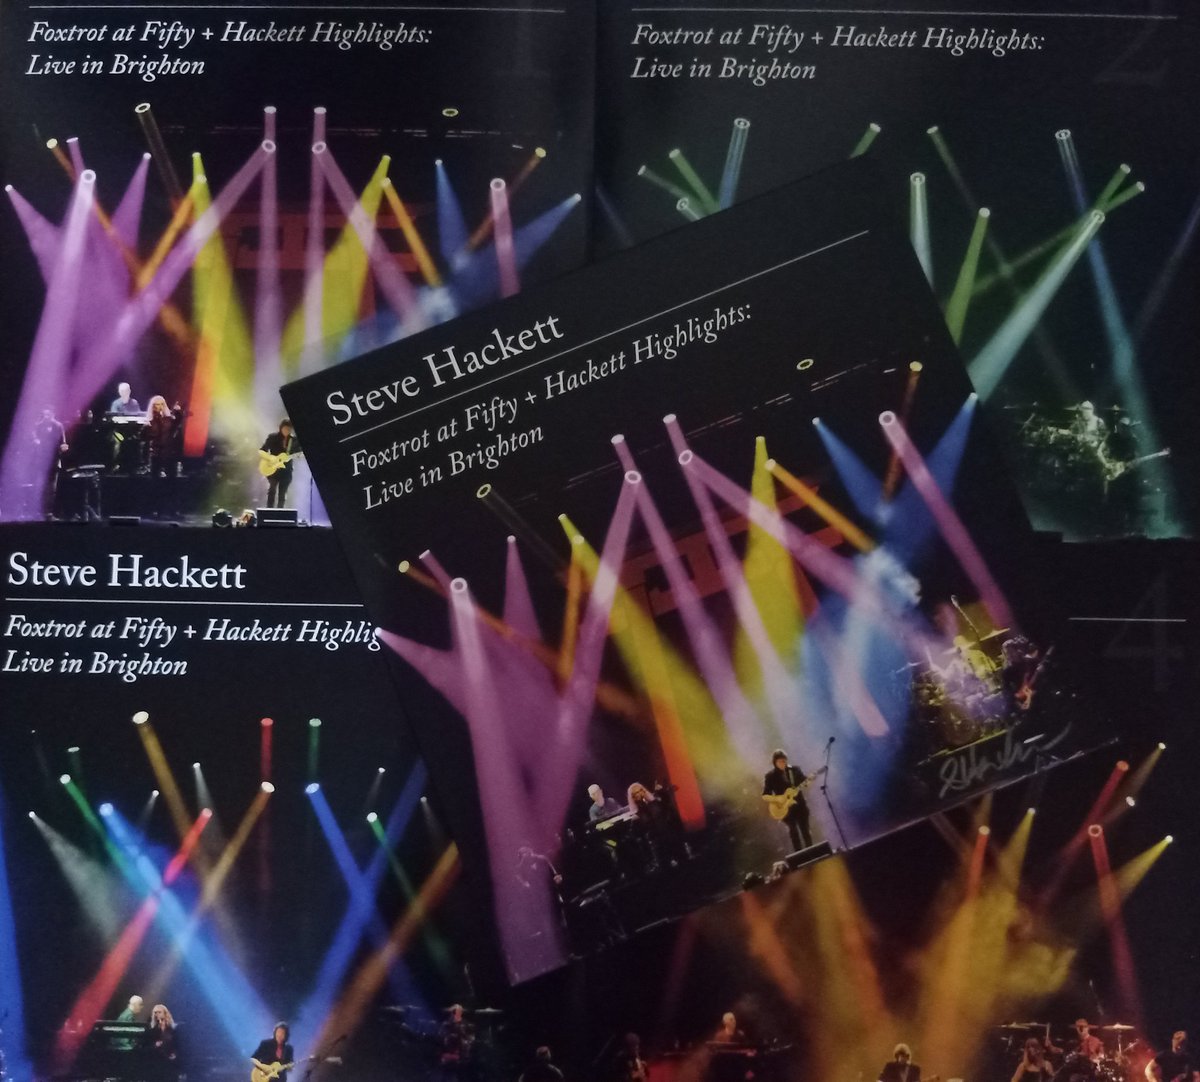 What a wonderful weekend surprise, brought back the spirit and marvelous sound of wonderful Foxtrot concerts that I was able to attend throughout the year! Thank you so much! @HackettOfficial @SylvanOfficial RogerKing , RobTownsend, Jonas Reingold,CraigBlundell @amandalehmann25